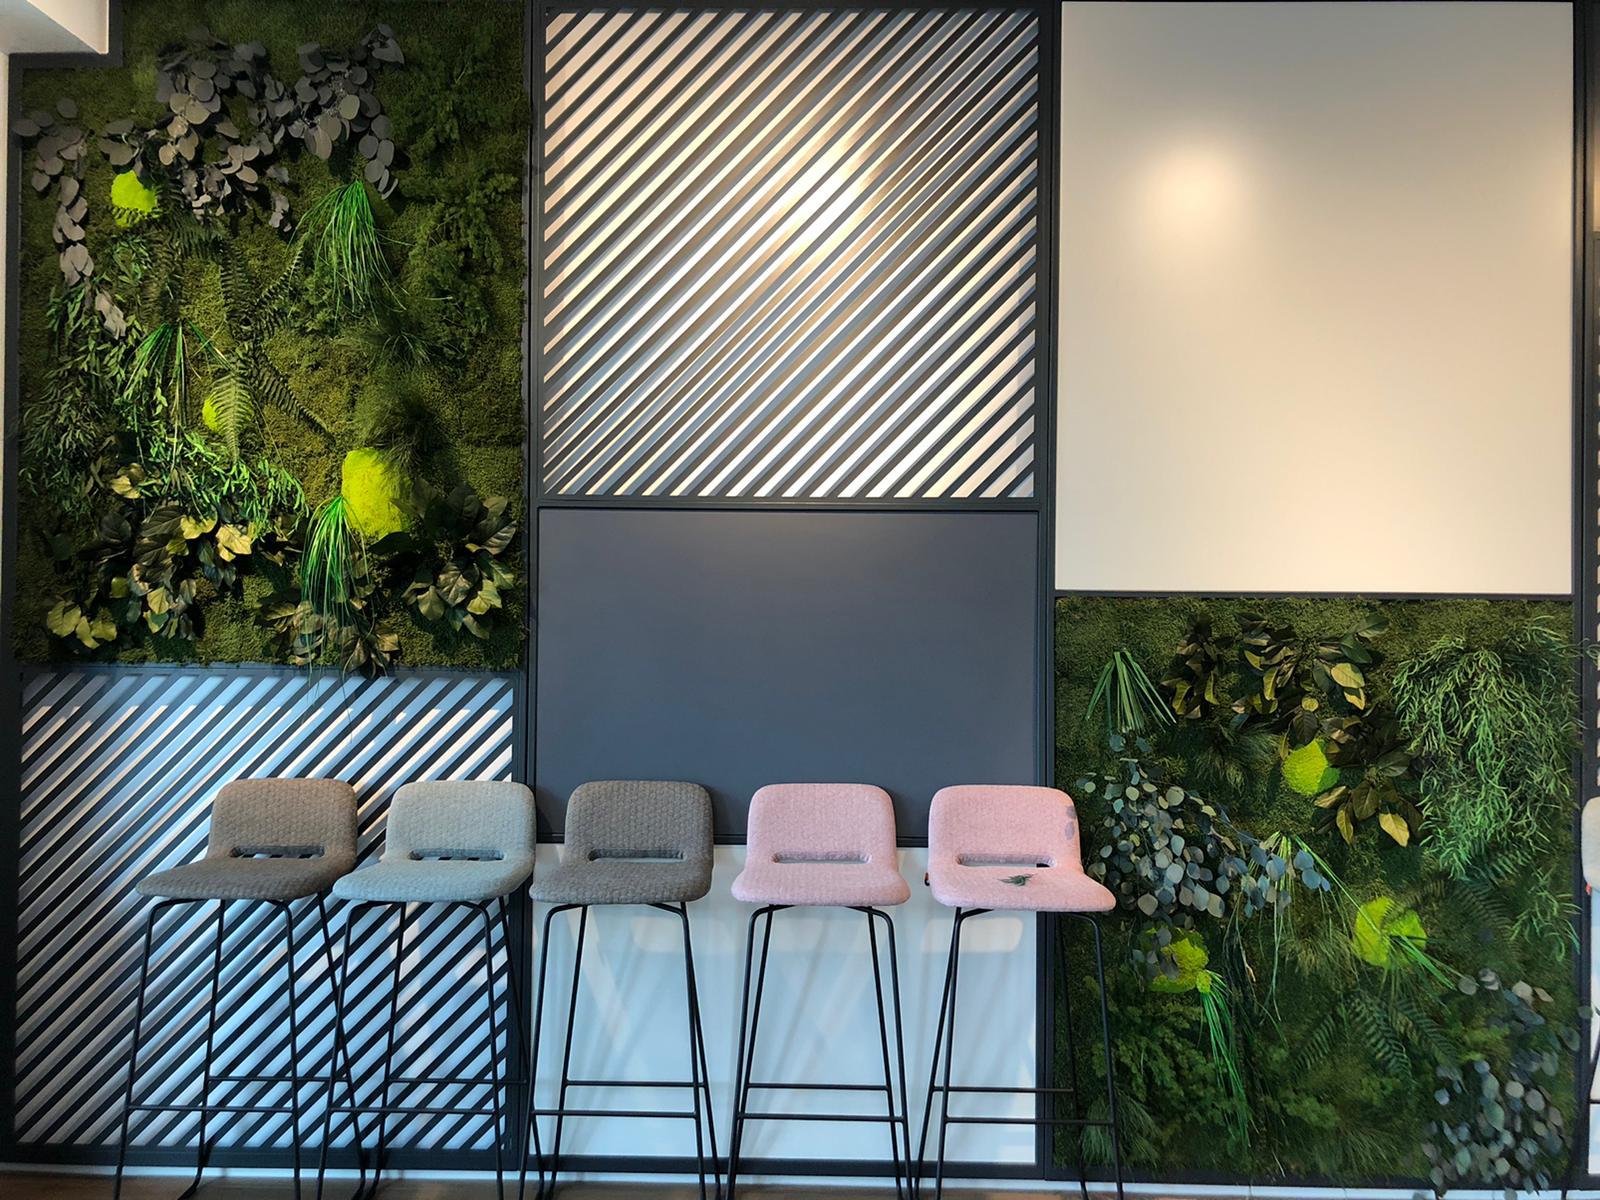 Square wall coverings made of jungle moss to improve the room acoustics